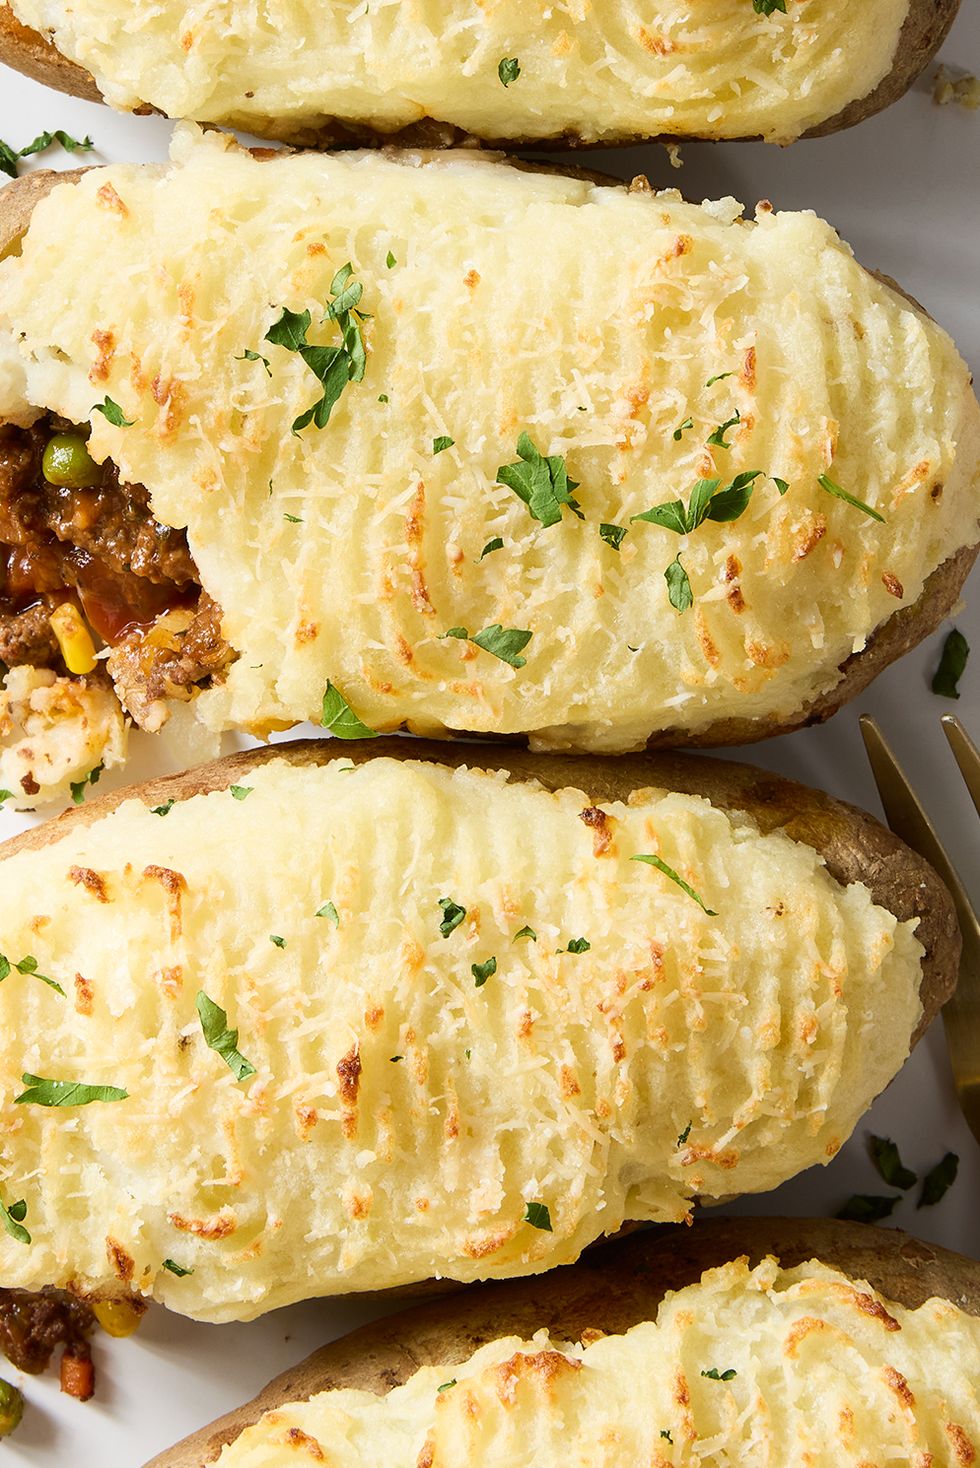 a saucy red wine spiked ground beef and vegetable mixture gets loaded into hollowed out russet potatoes, topped with parmesan mashed potatoes, and baked until golden brown